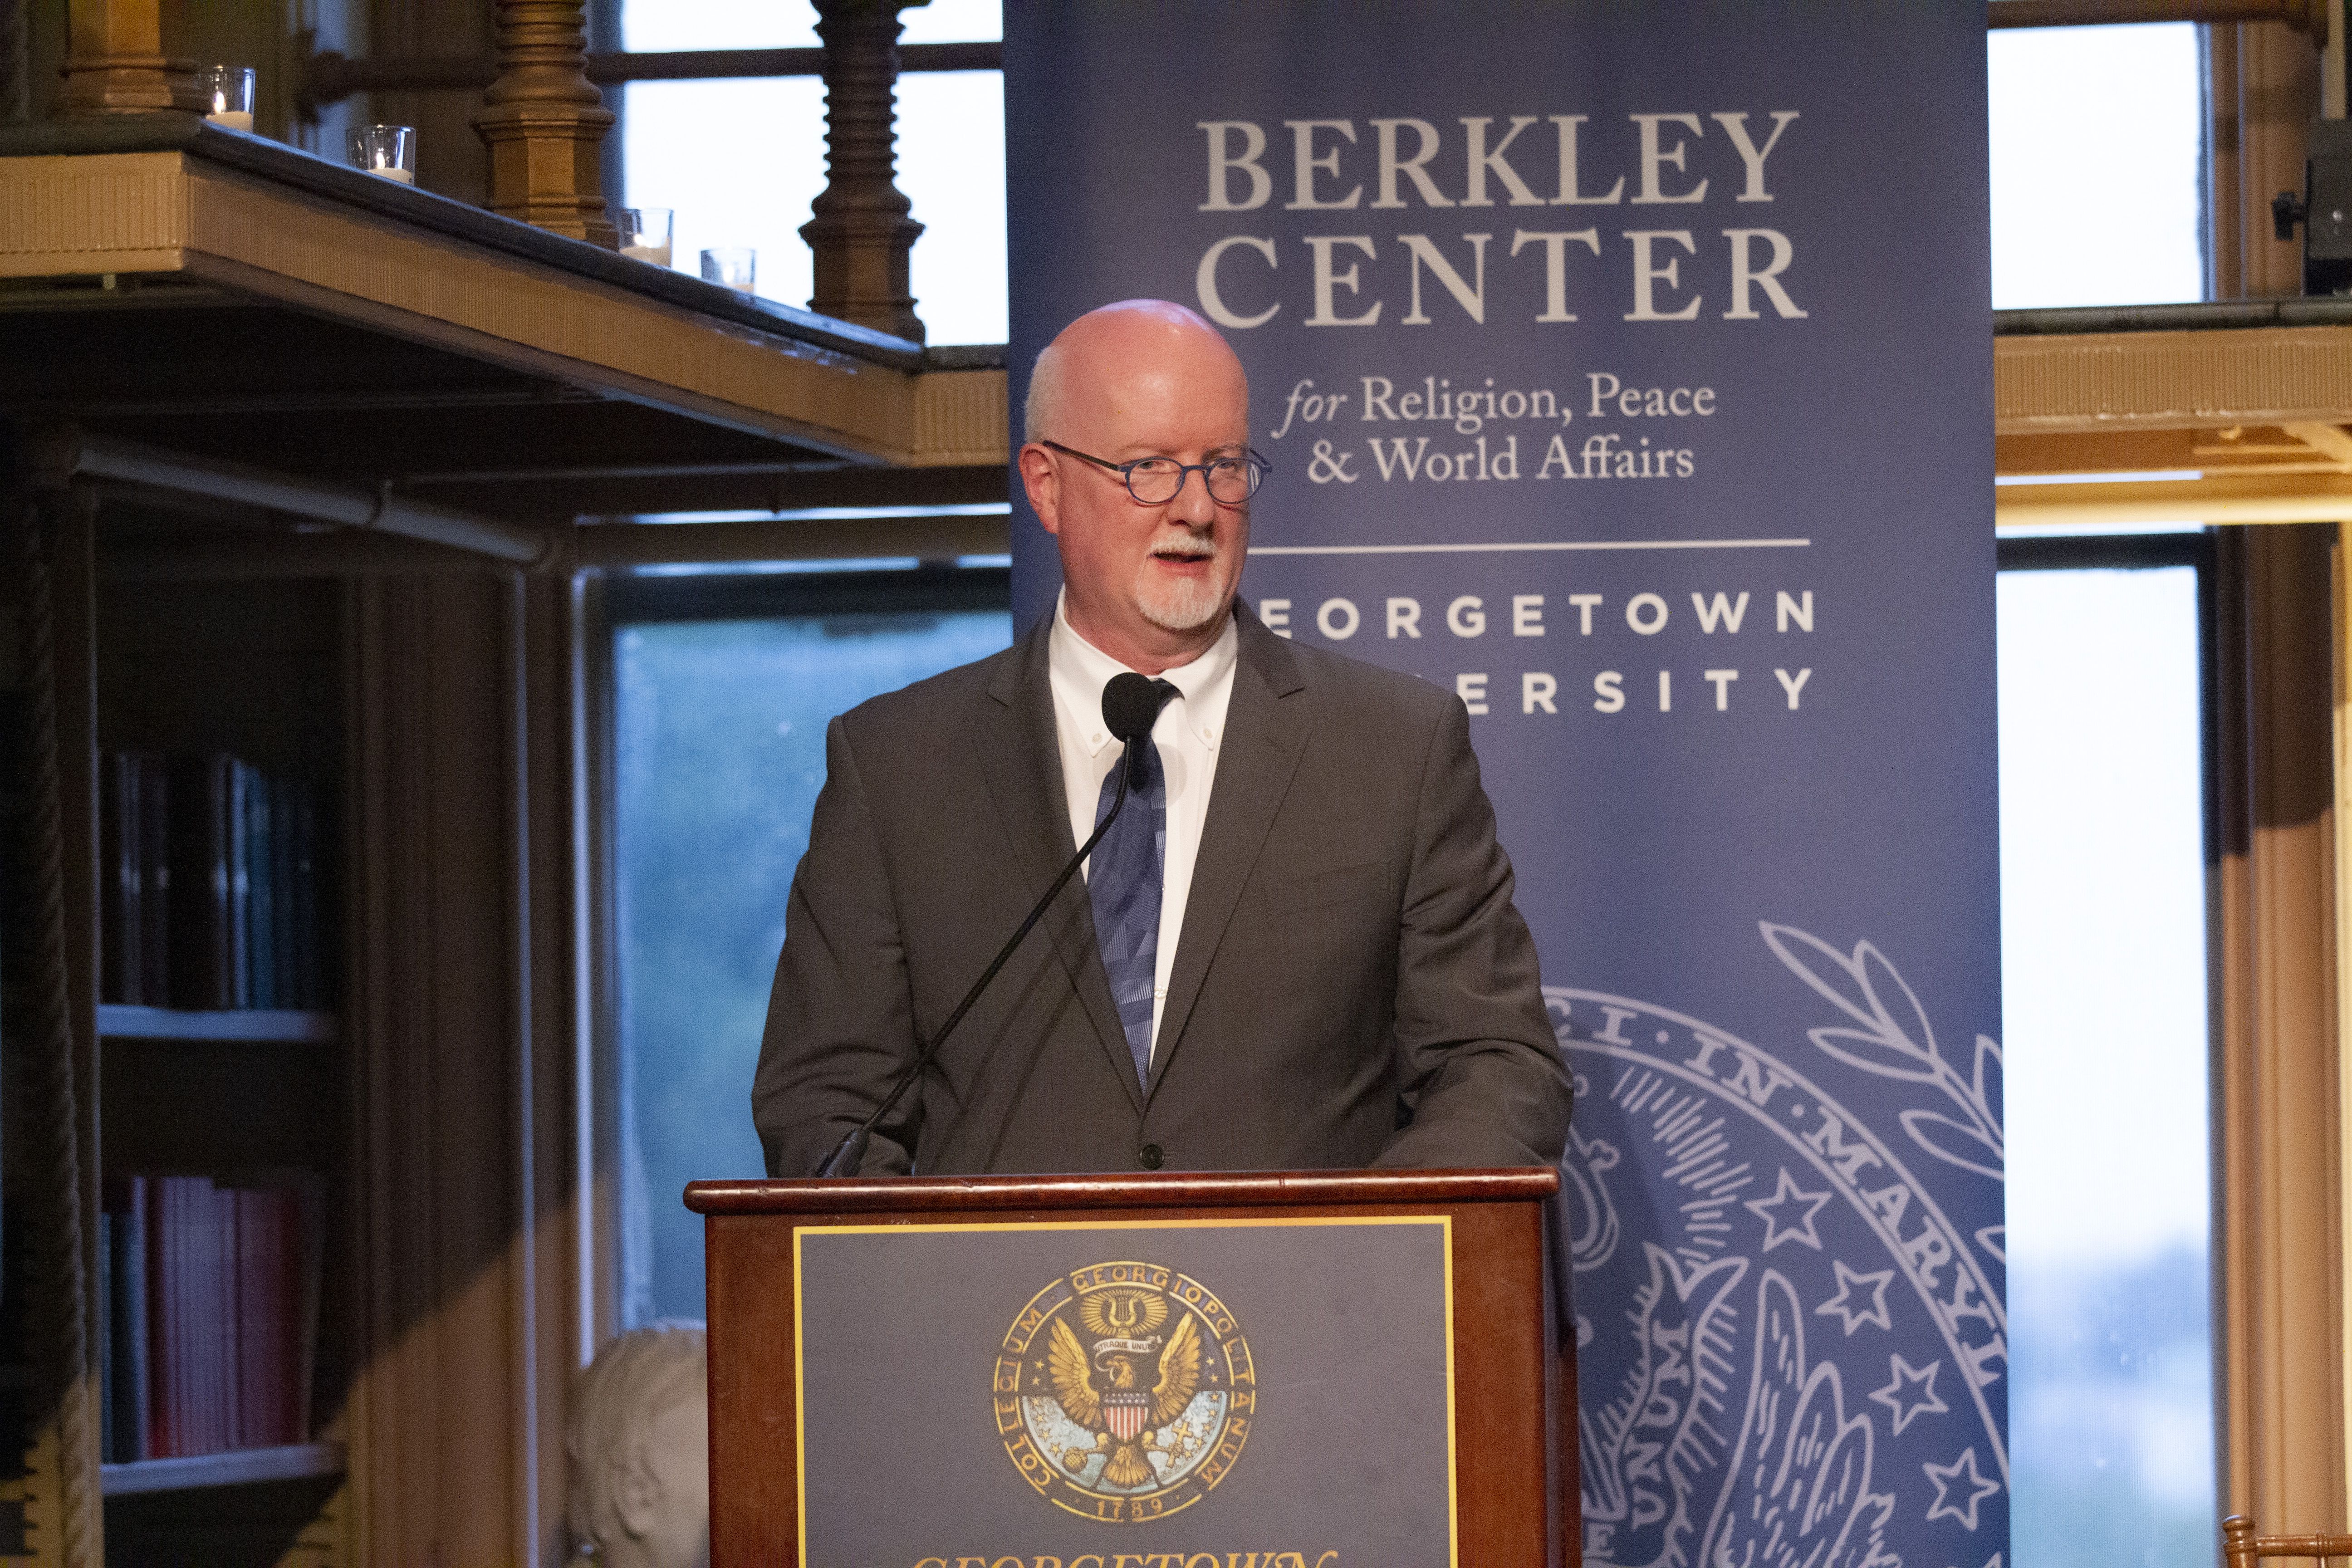 Director of the Berkley Center and panelist at the Pulitzer Center's Beyond Religion Conference, Shaun Casey, emphasizes the significance of the Pulitzer Center in developing Georgetown students' passion for journalism. Image by Jin Ding. United States, 2019.